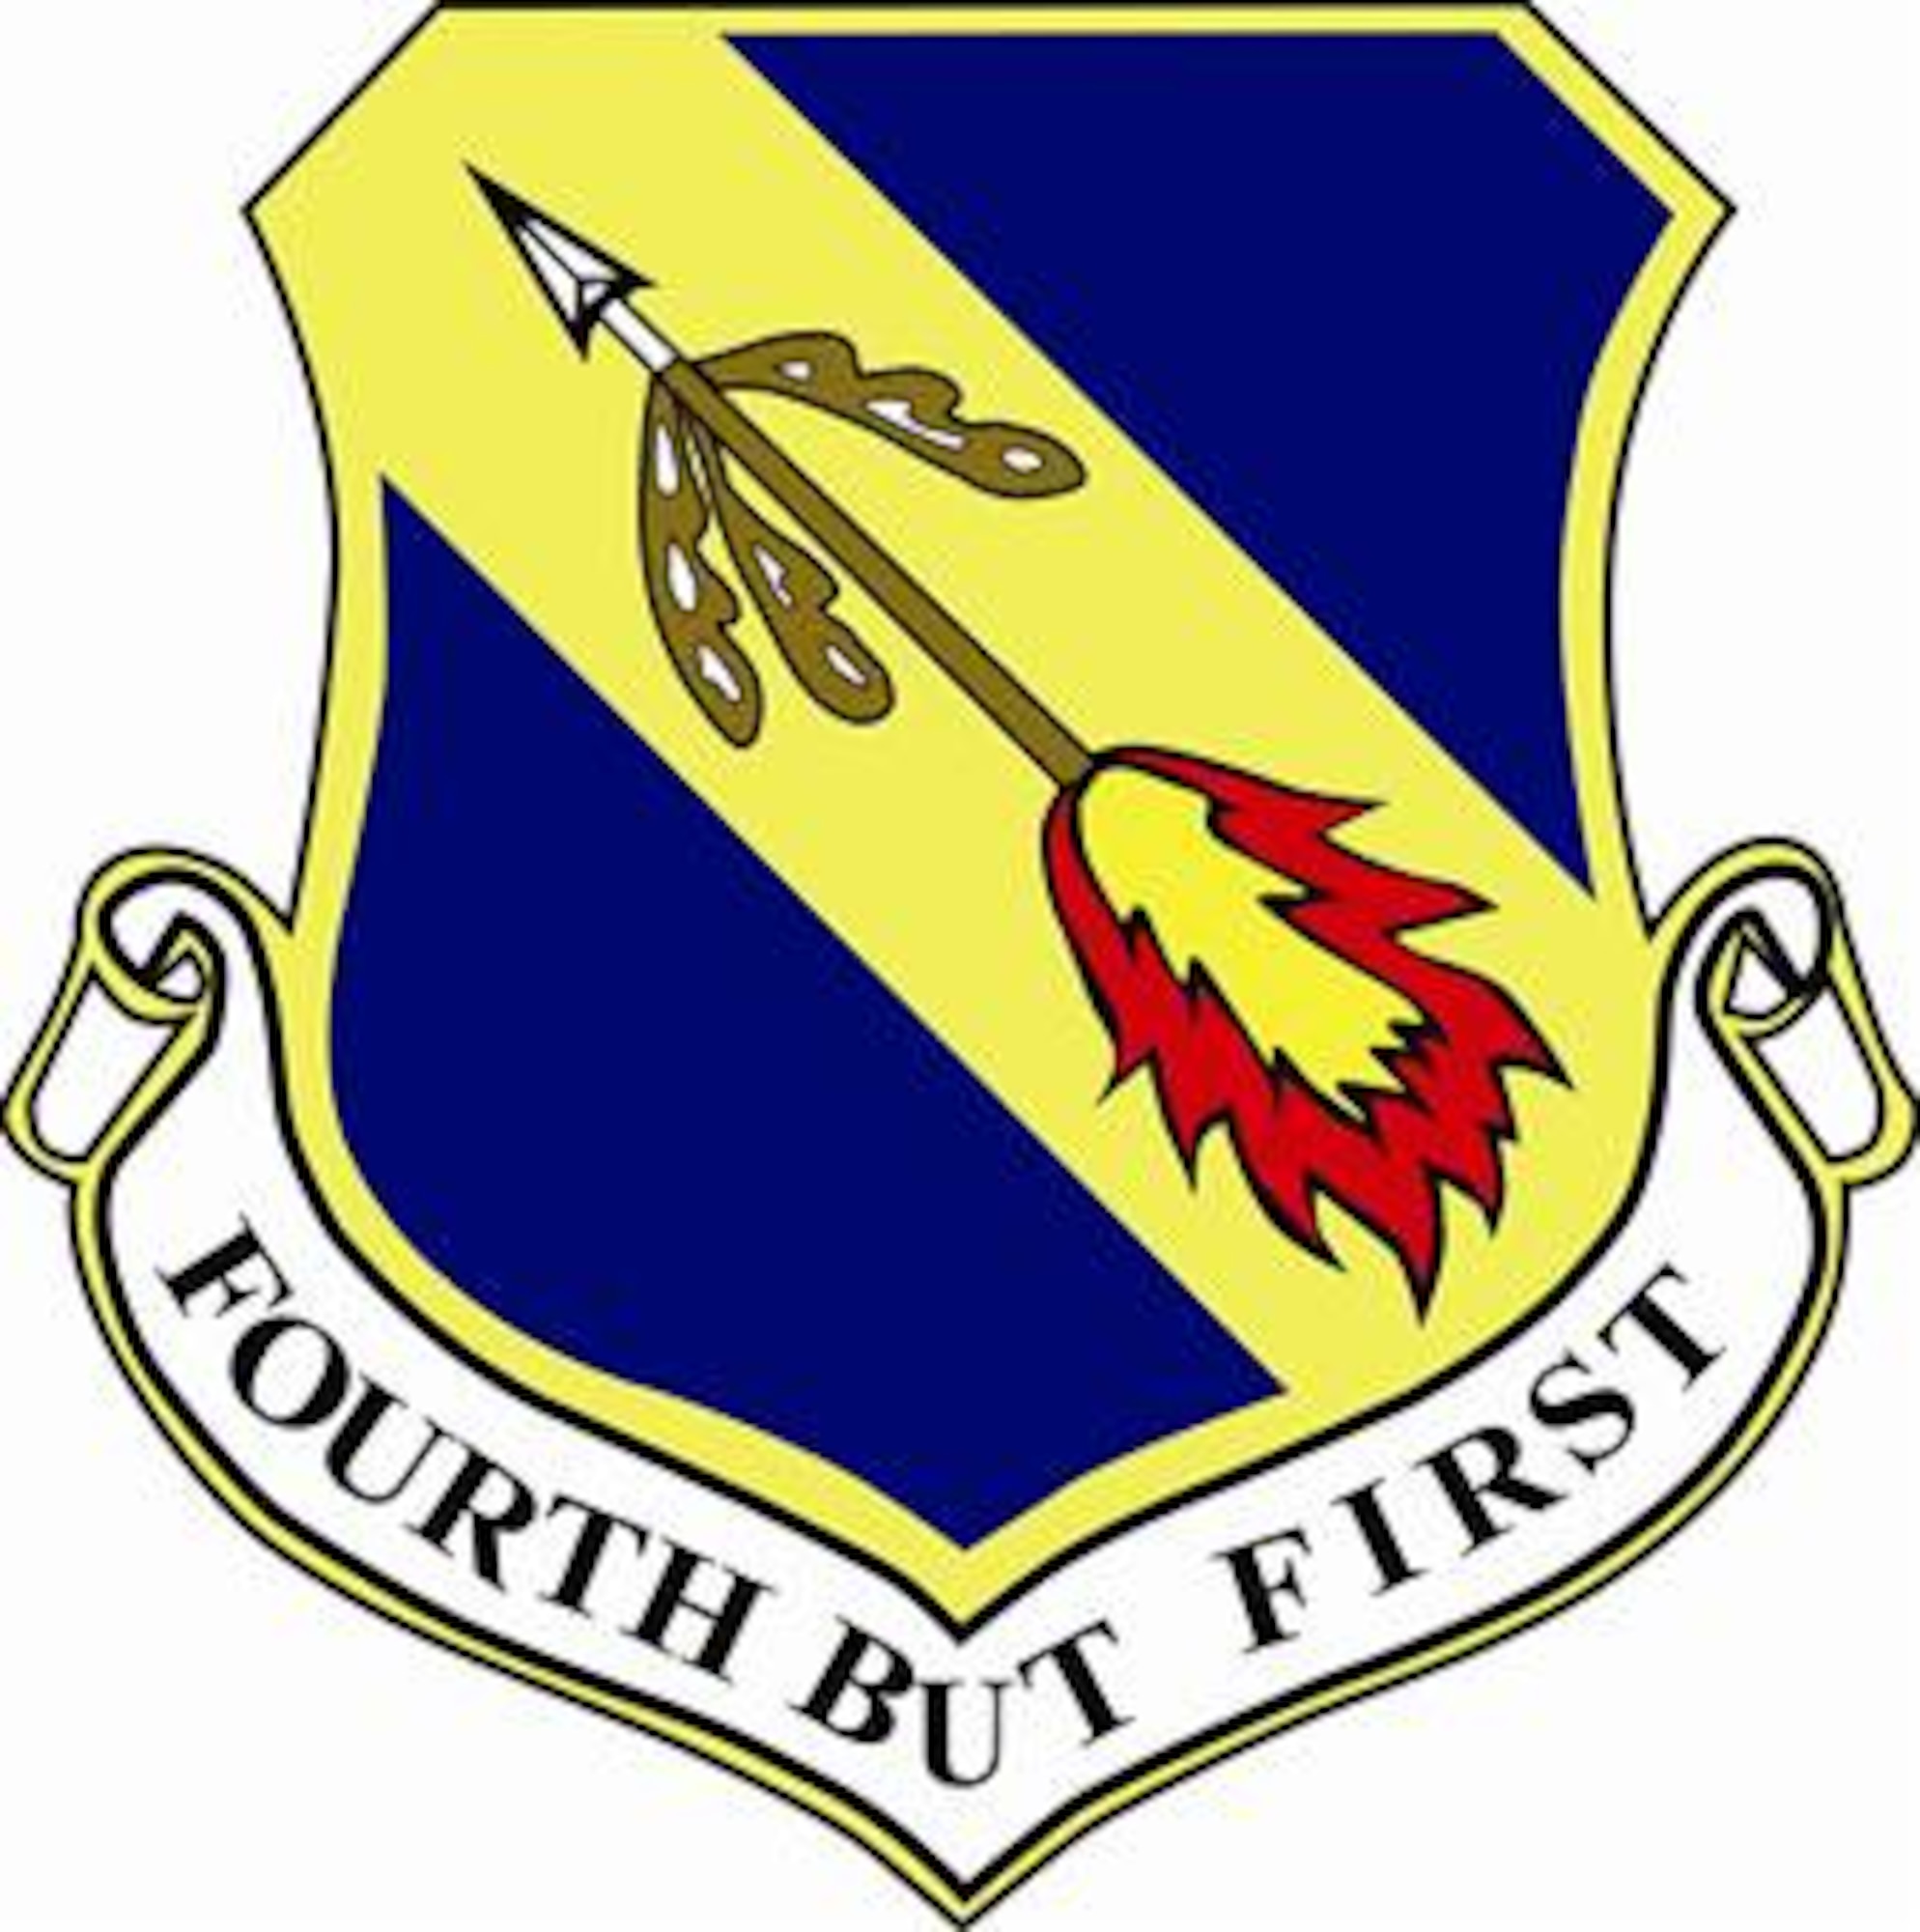 4th Fighter Wing shield (color), provided by 4th Fighter Wing Public Affairs.